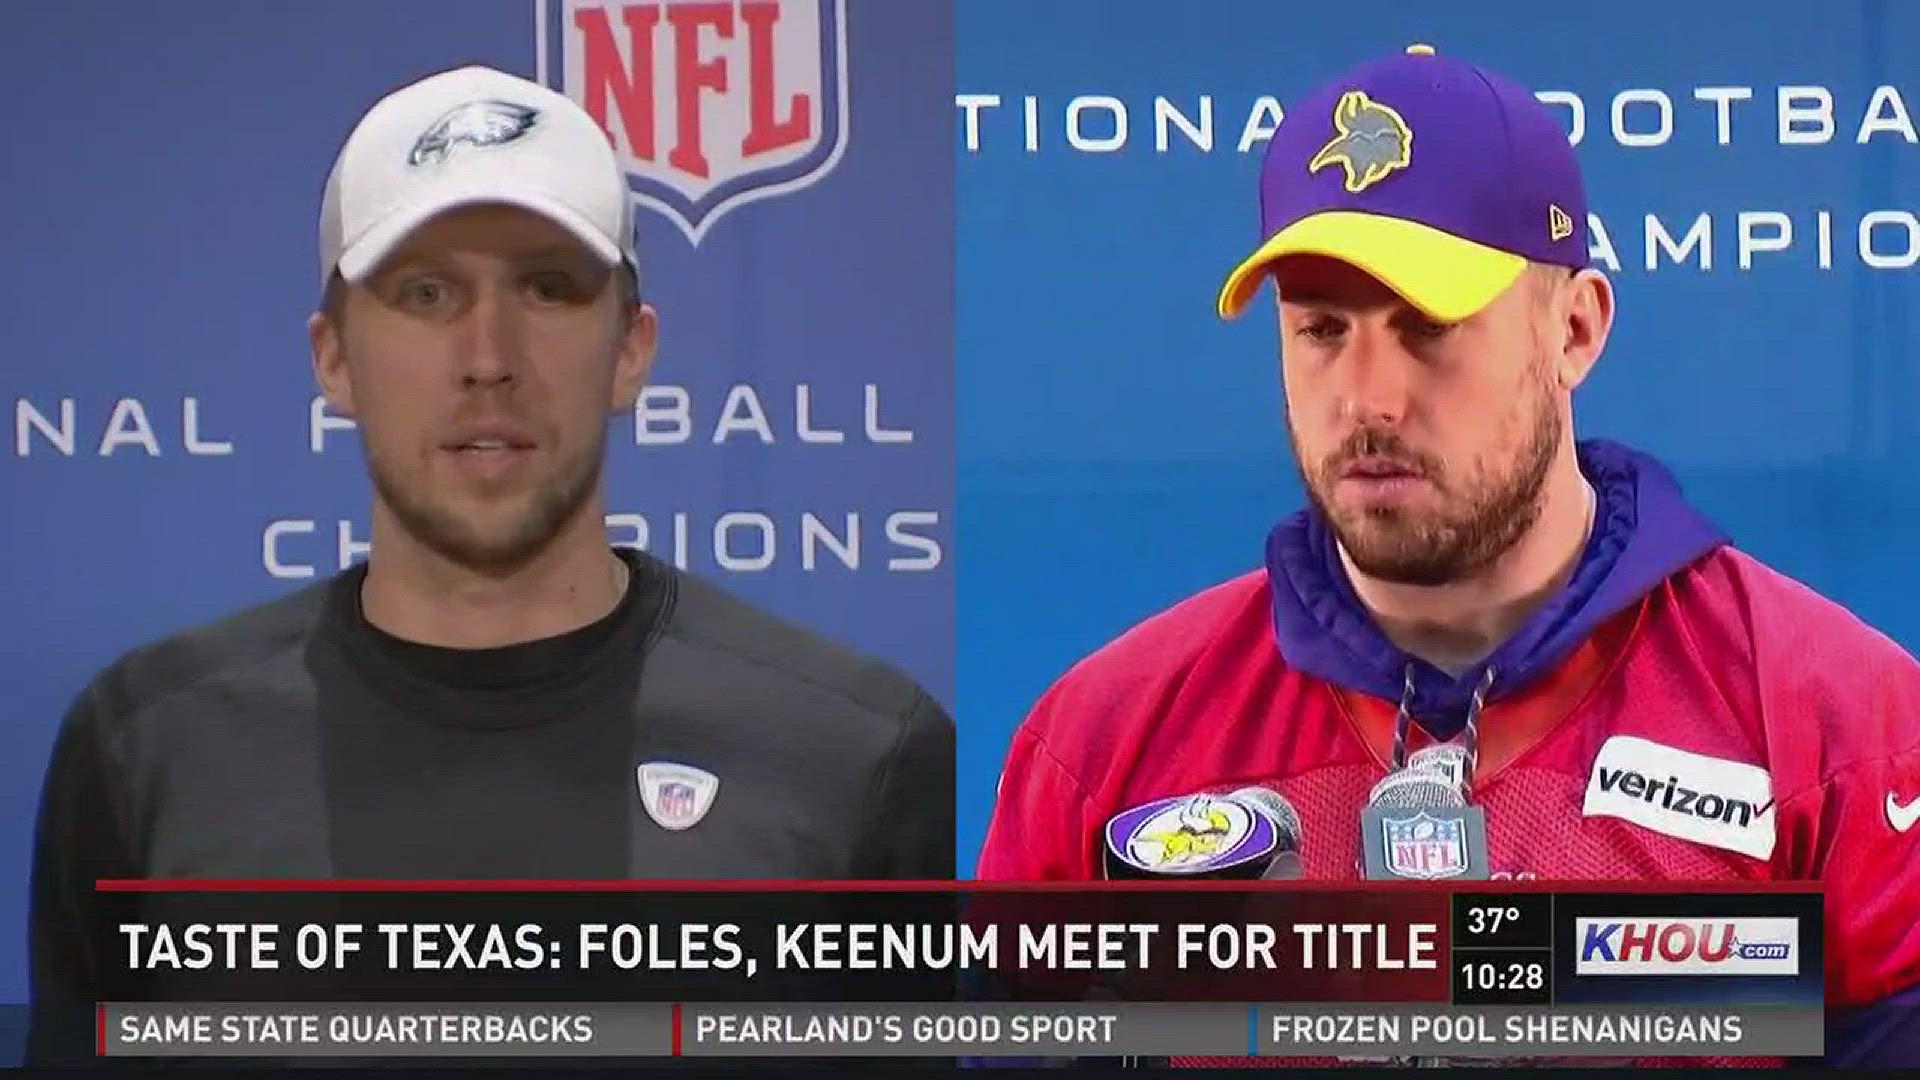 Two quarterbacks, Nick Foles and Case Keenum are both from Texas, Foles from Austin and Keenum is from Abilene, but they will face each other in the NFC Championship.